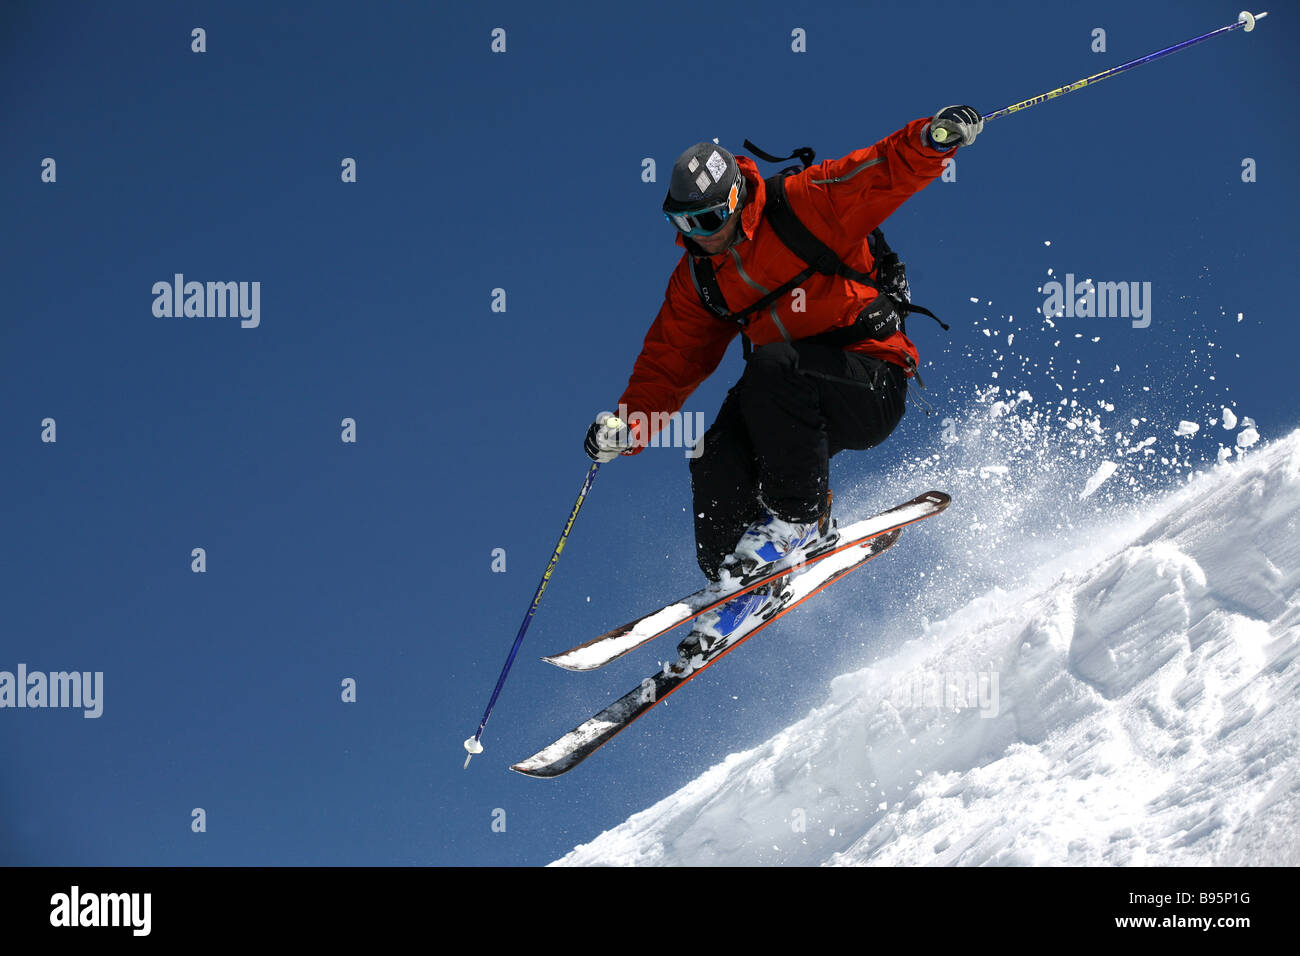 Generic shot of skier at speed in red jacket Stock Photo